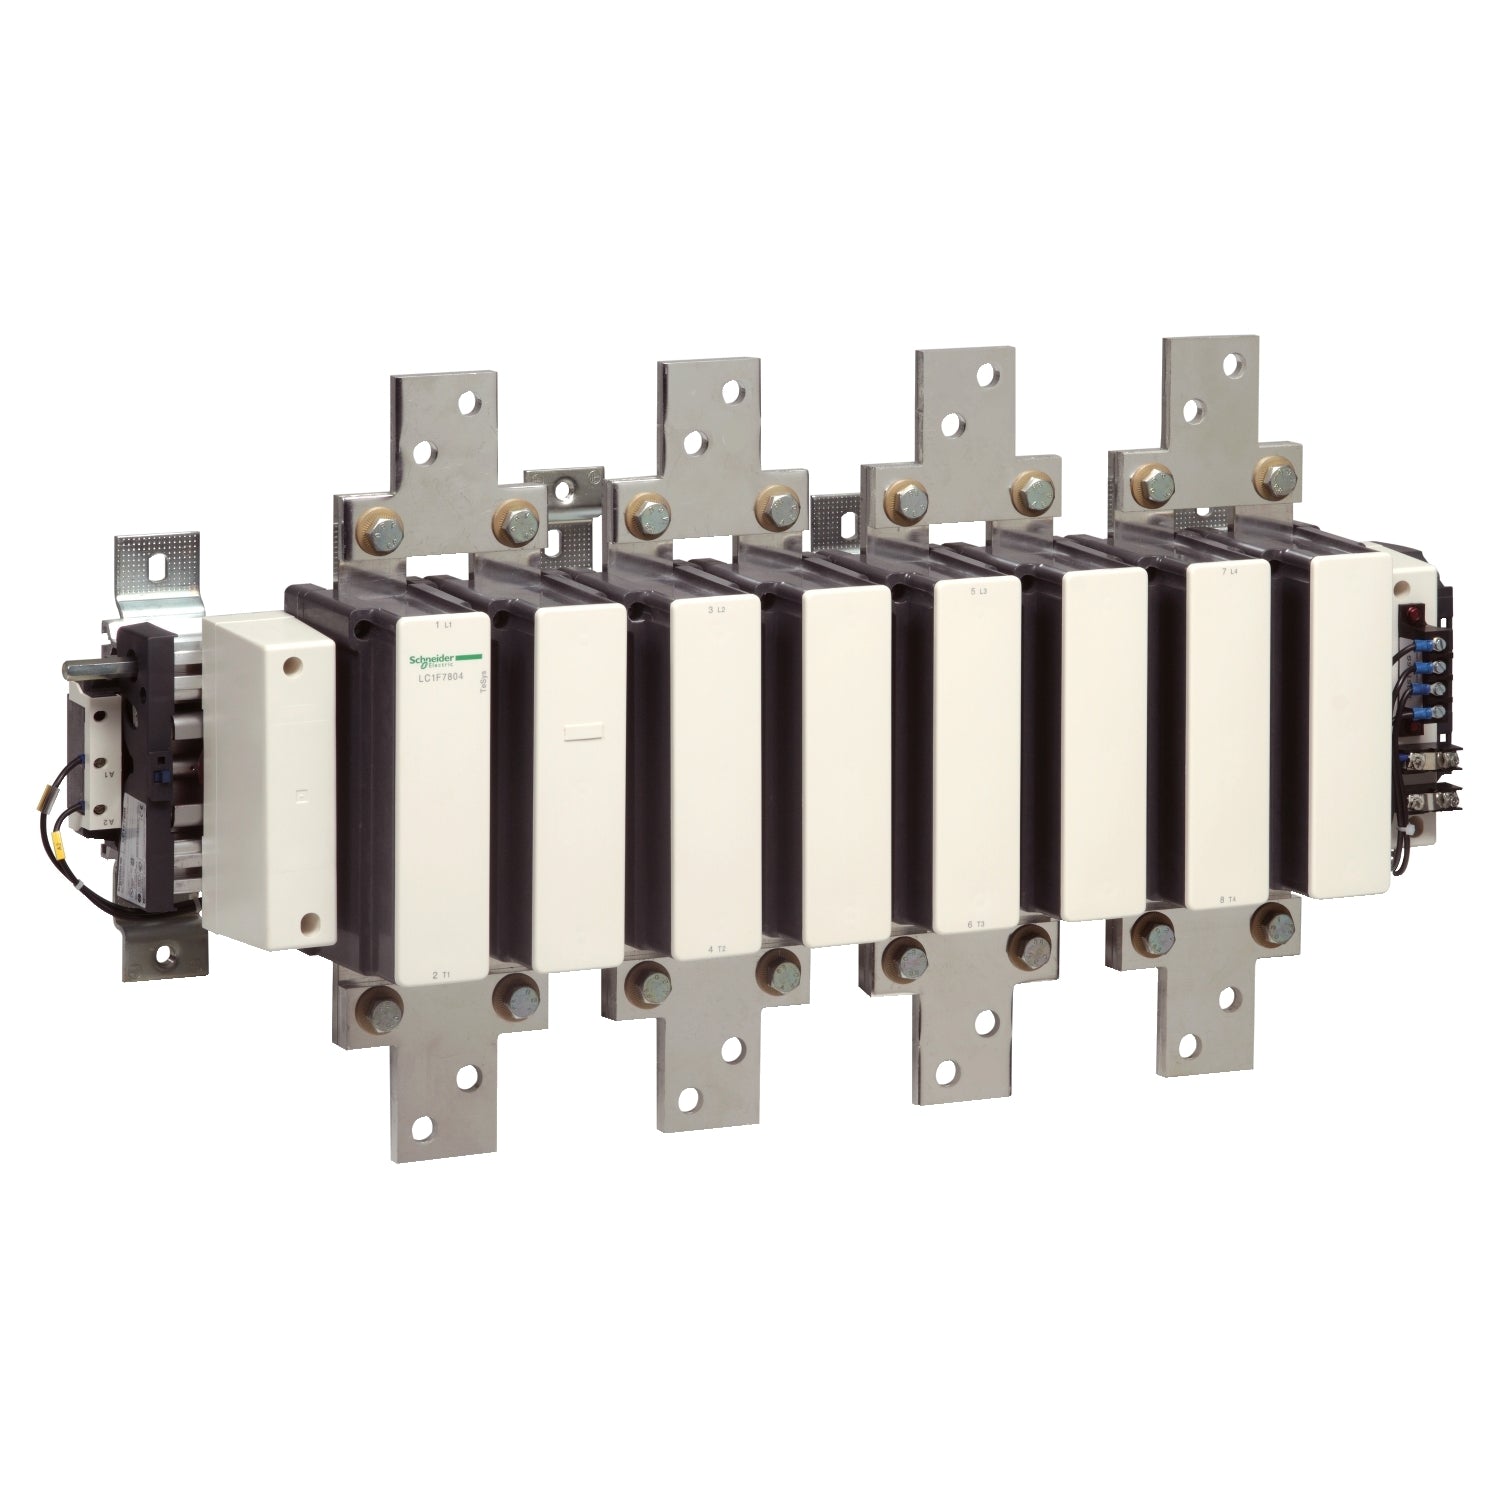 Schneider LC1F7804 TeSys D Contactor Price in Pakistan 